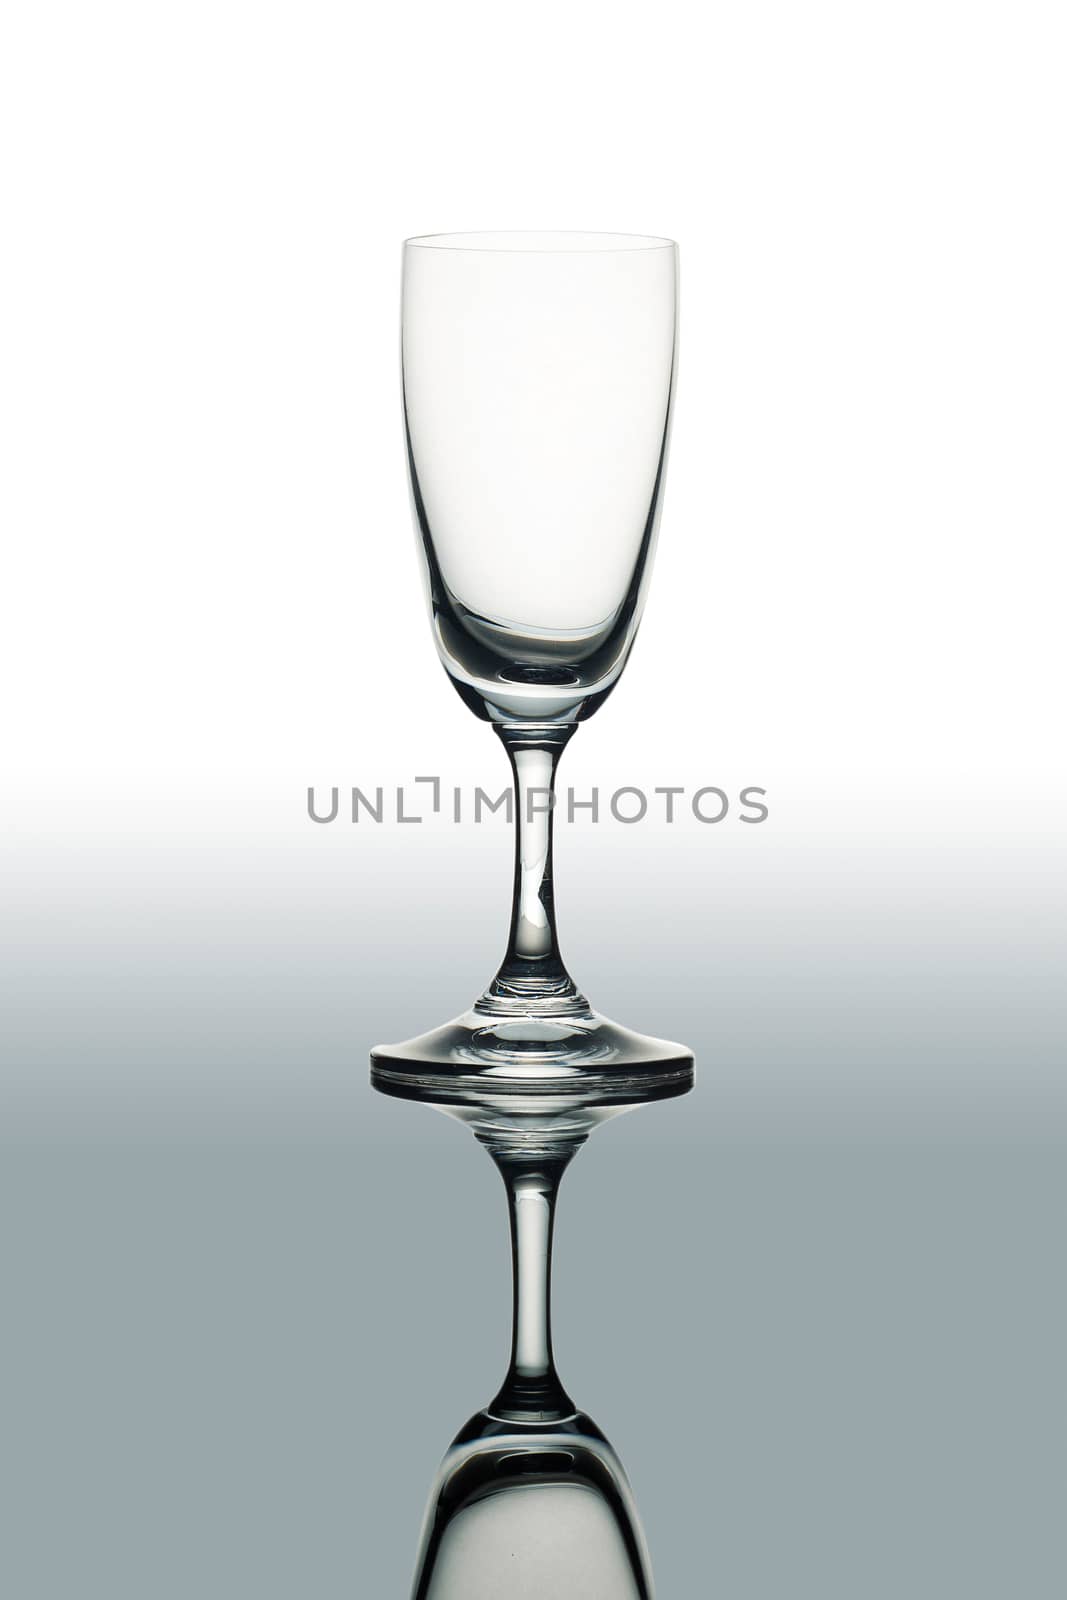 Empty wine glass isolated on the white background, clipping path included. by asiandelight